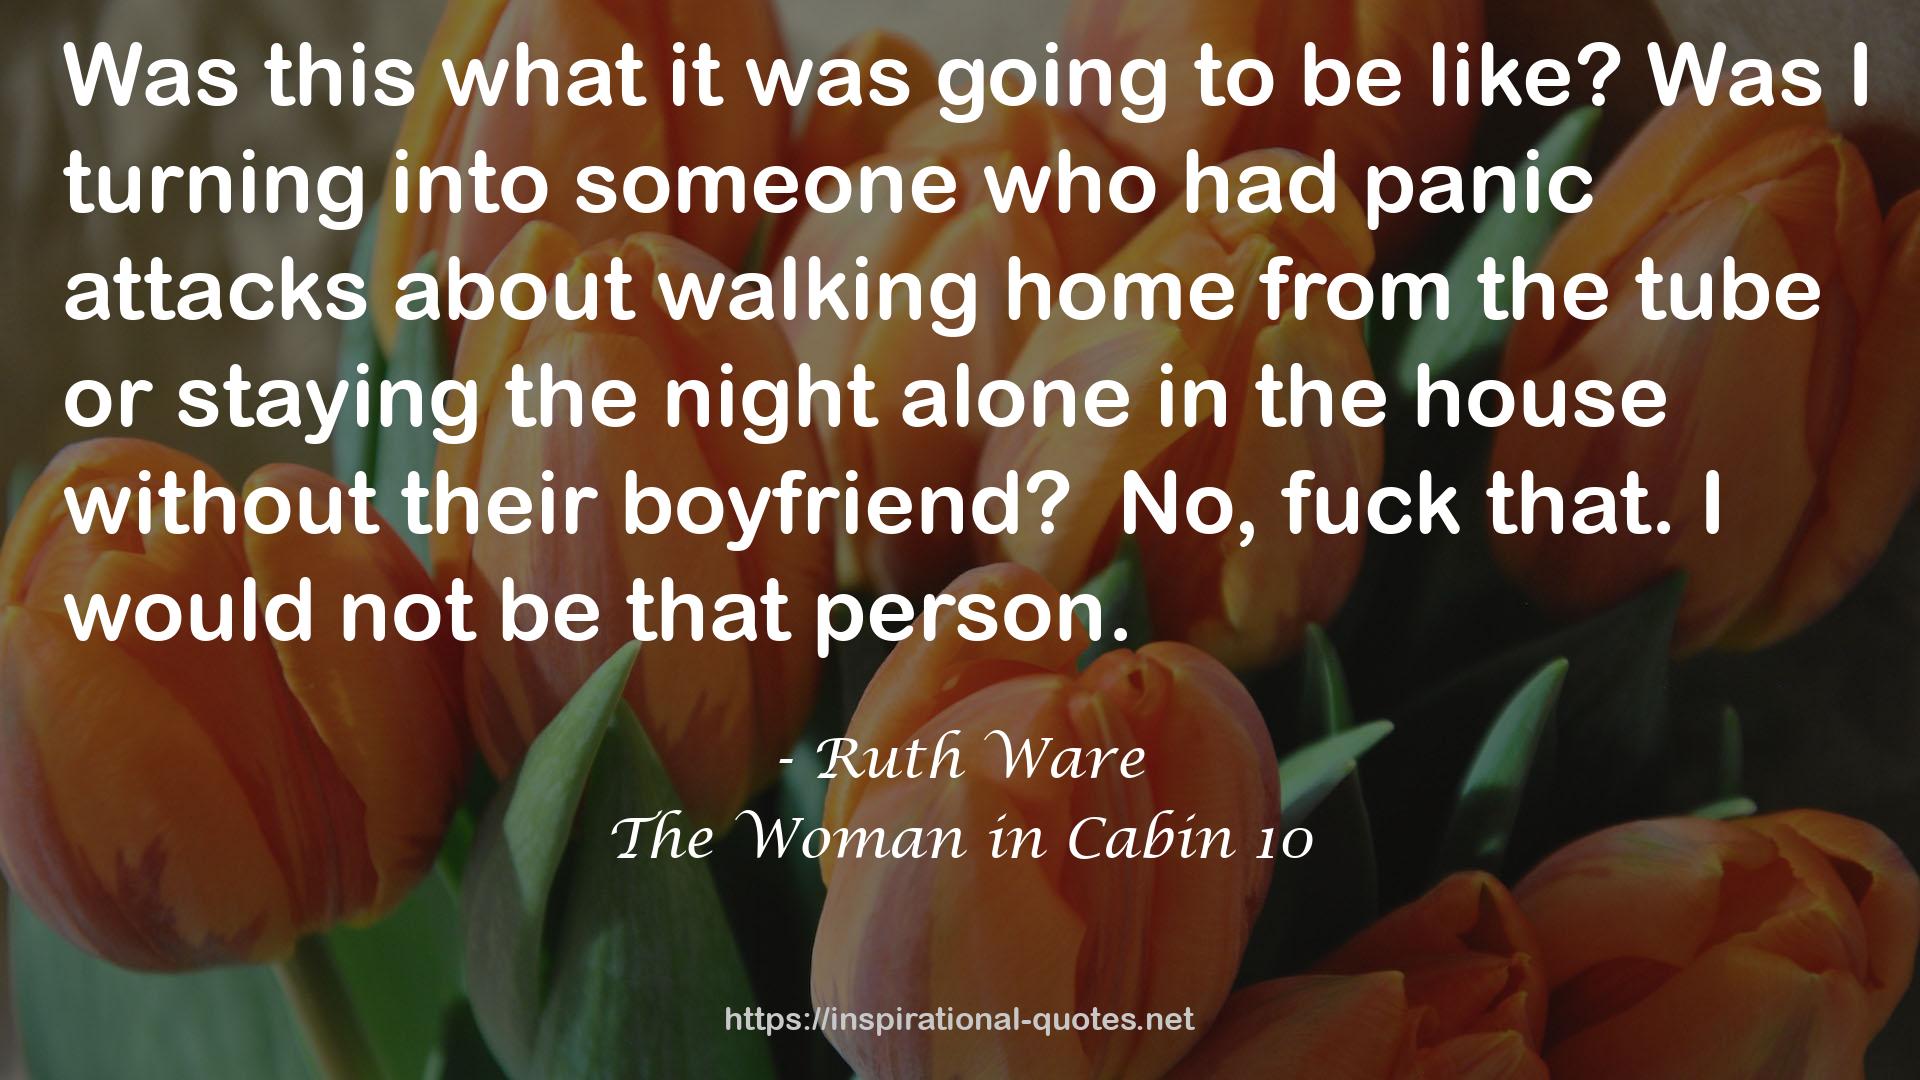 The Woman in Cabin 10 QUOTES